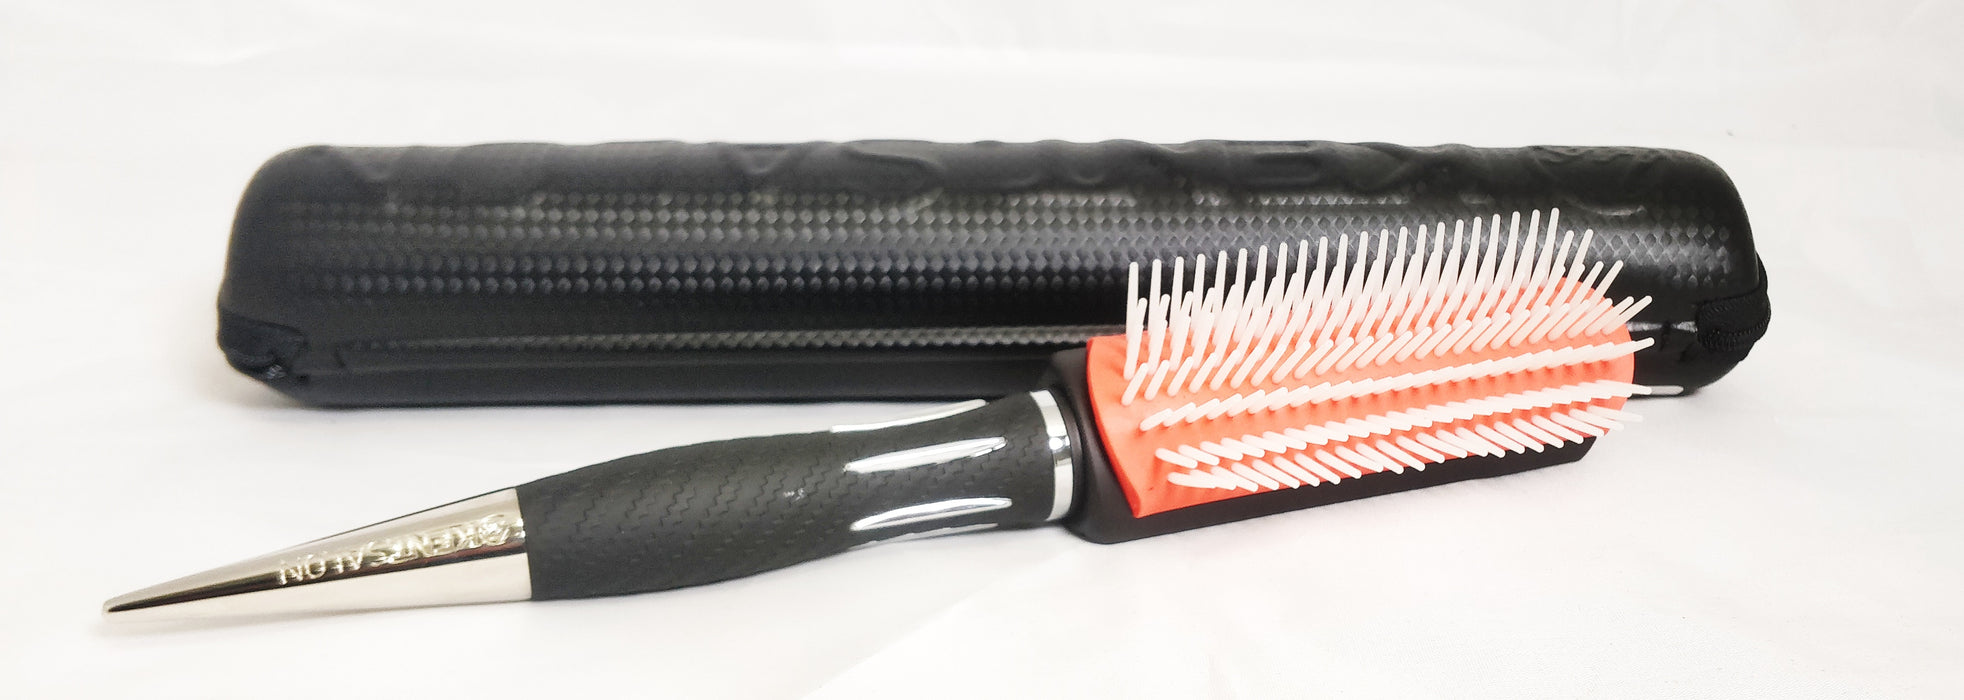 Kent Styling and Grooming Brush